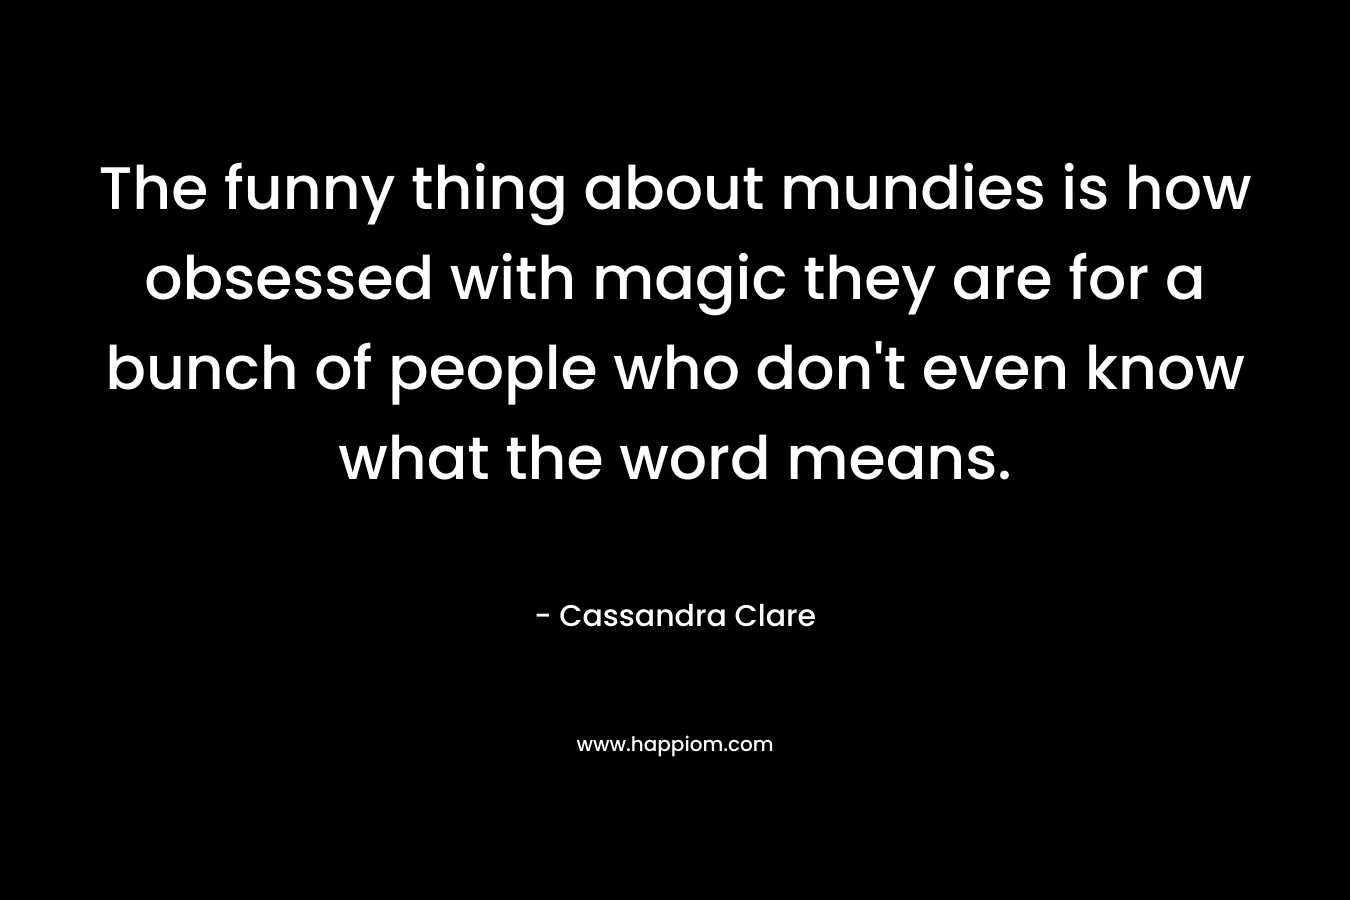 The funny thing about mundies is how obsessed with magic they are for a bunch of people who don't even know what the word means.